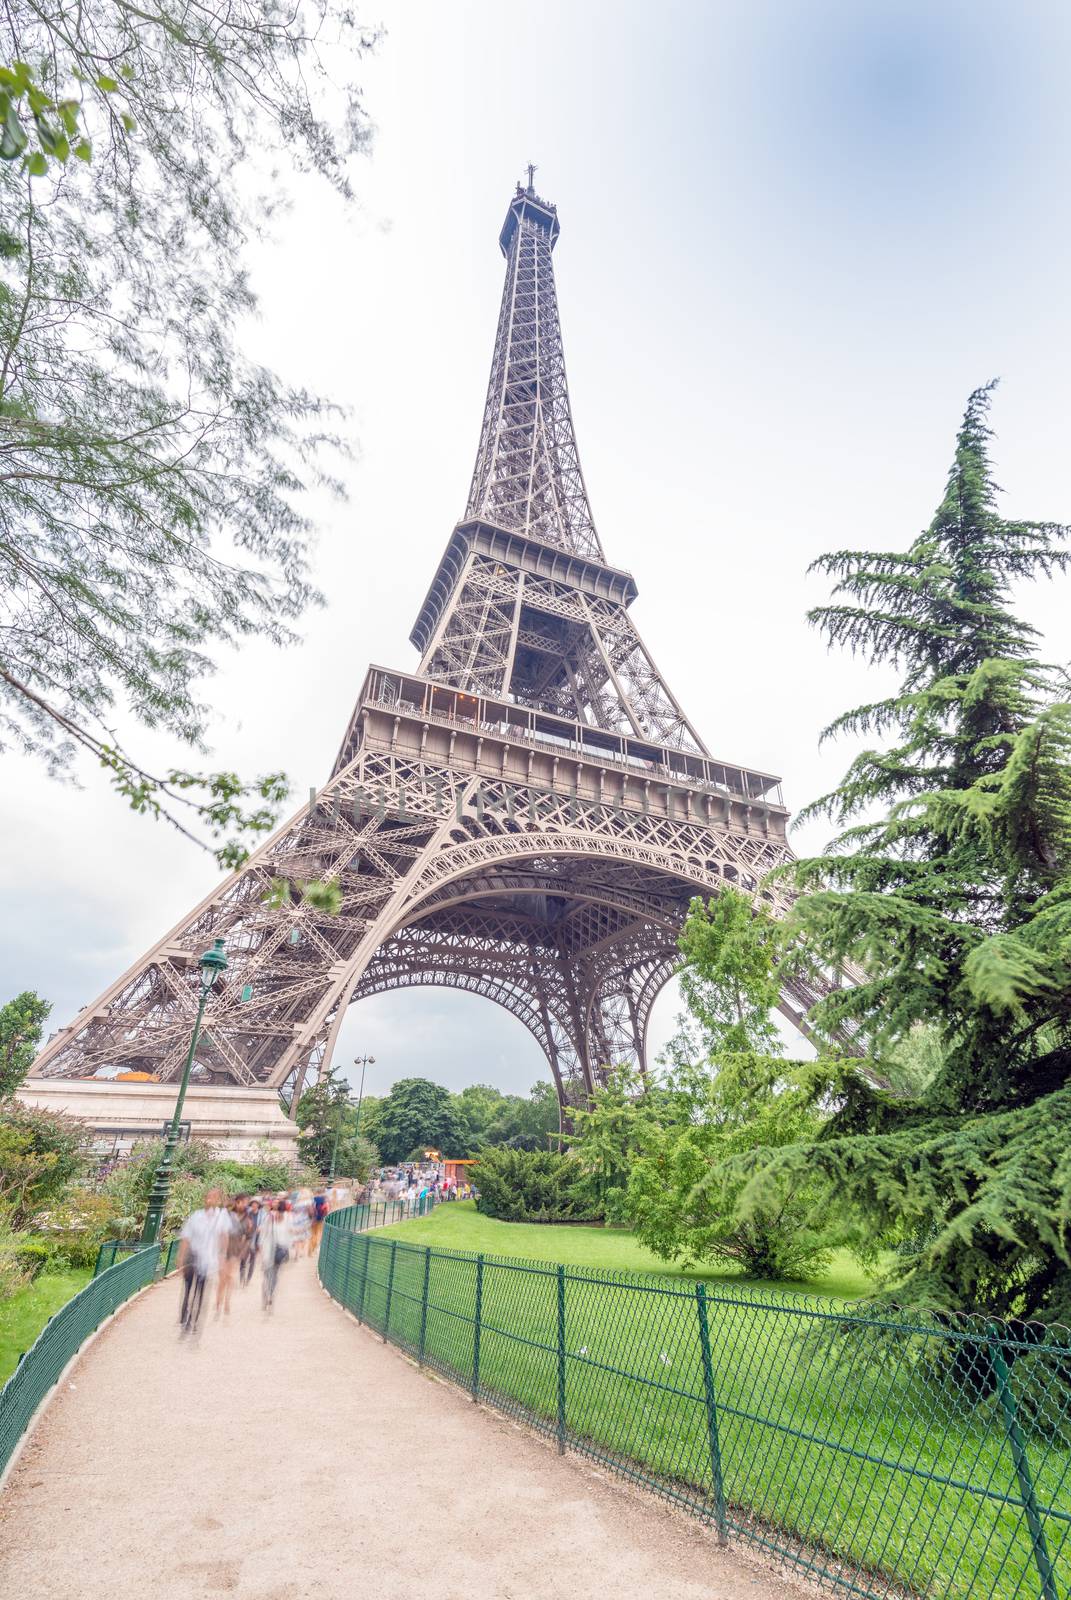 View of Eiffel Tower from surrounding gardens - Paris.